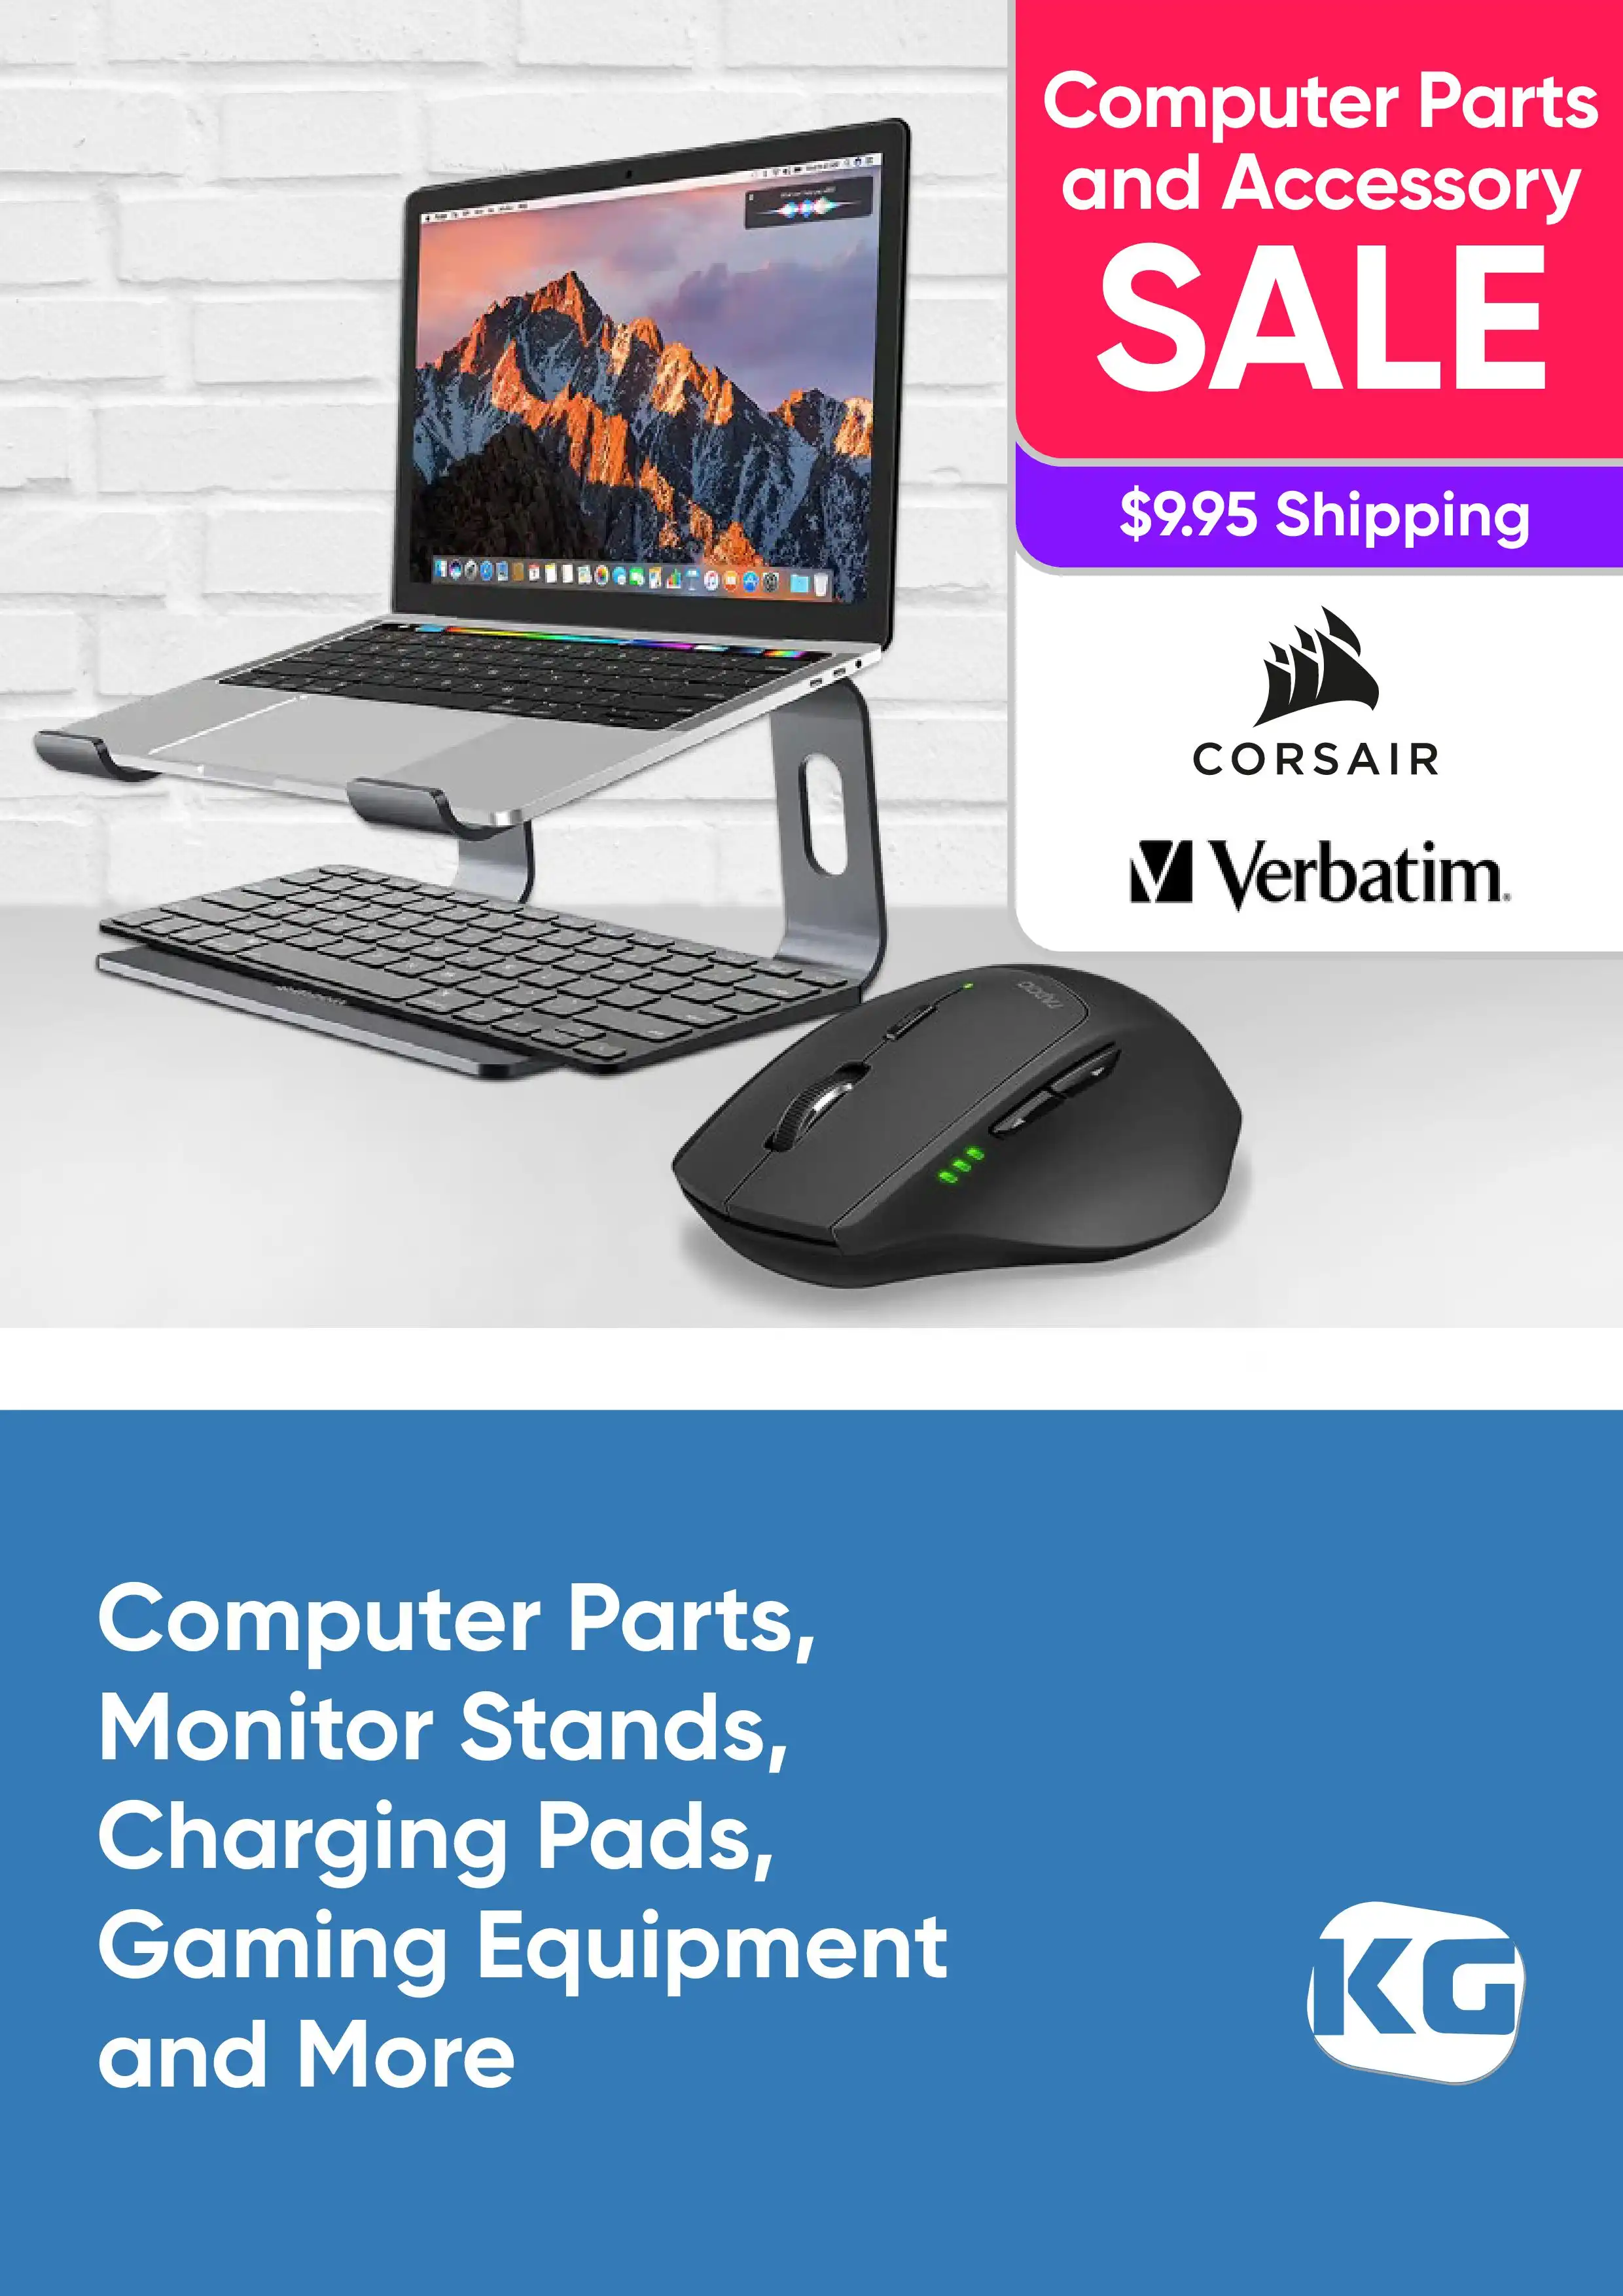 Computer Parts, Monitor Stands, Charging Pads, Gaming Equipment and More